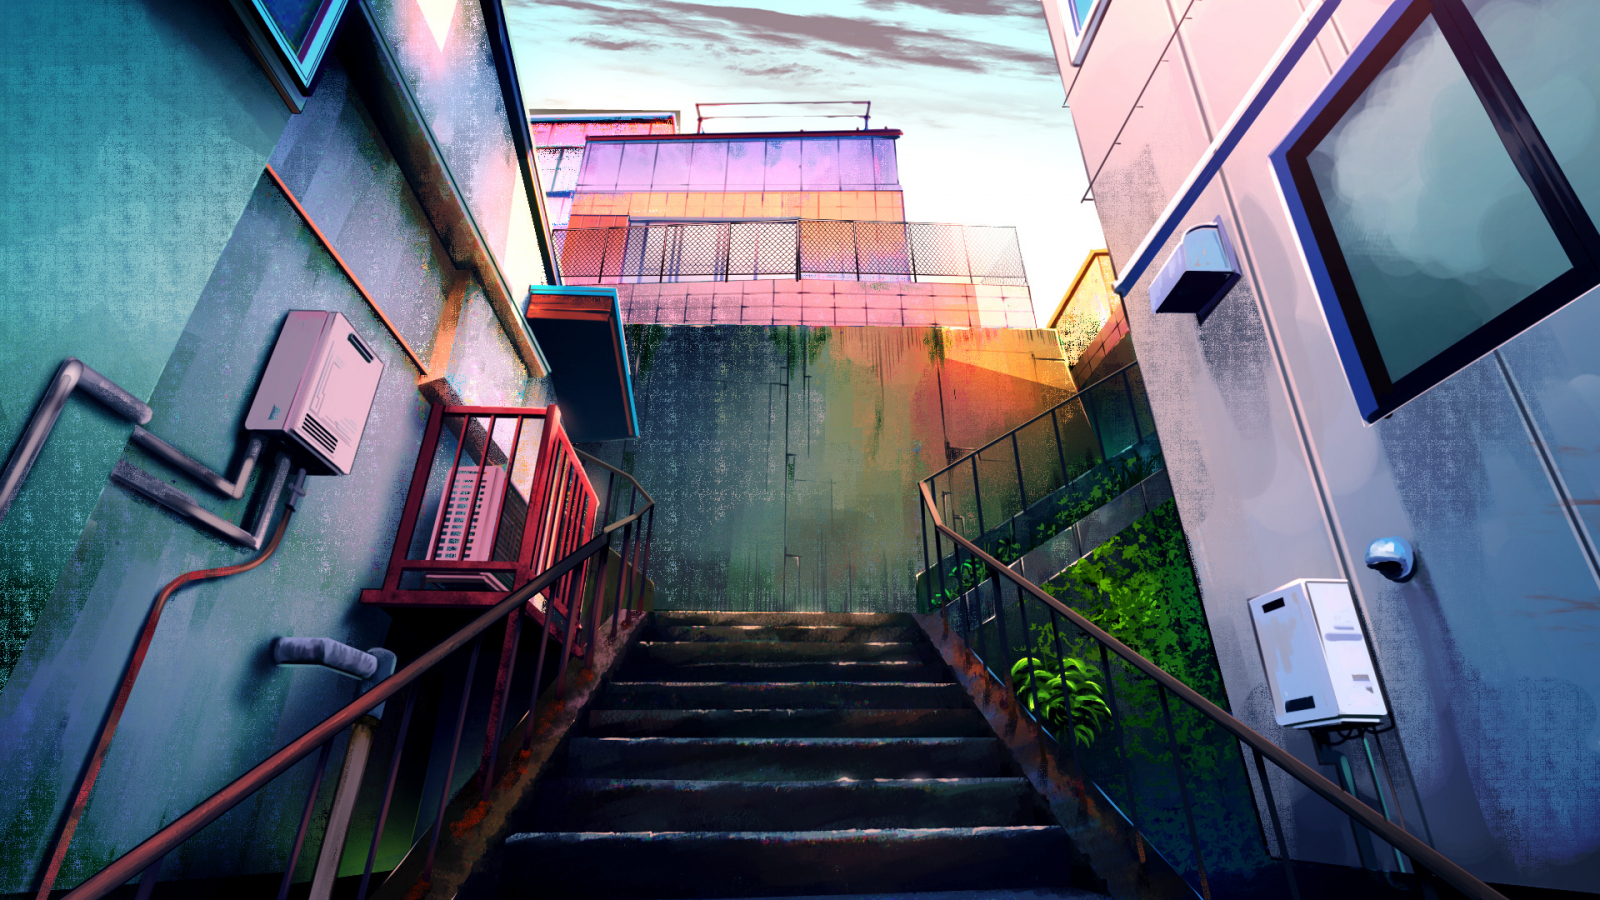 Download wallpaper 1600x900 town, apartments, city, stair, anime, 16:9  widescreen 1600x900 hd background, 17121